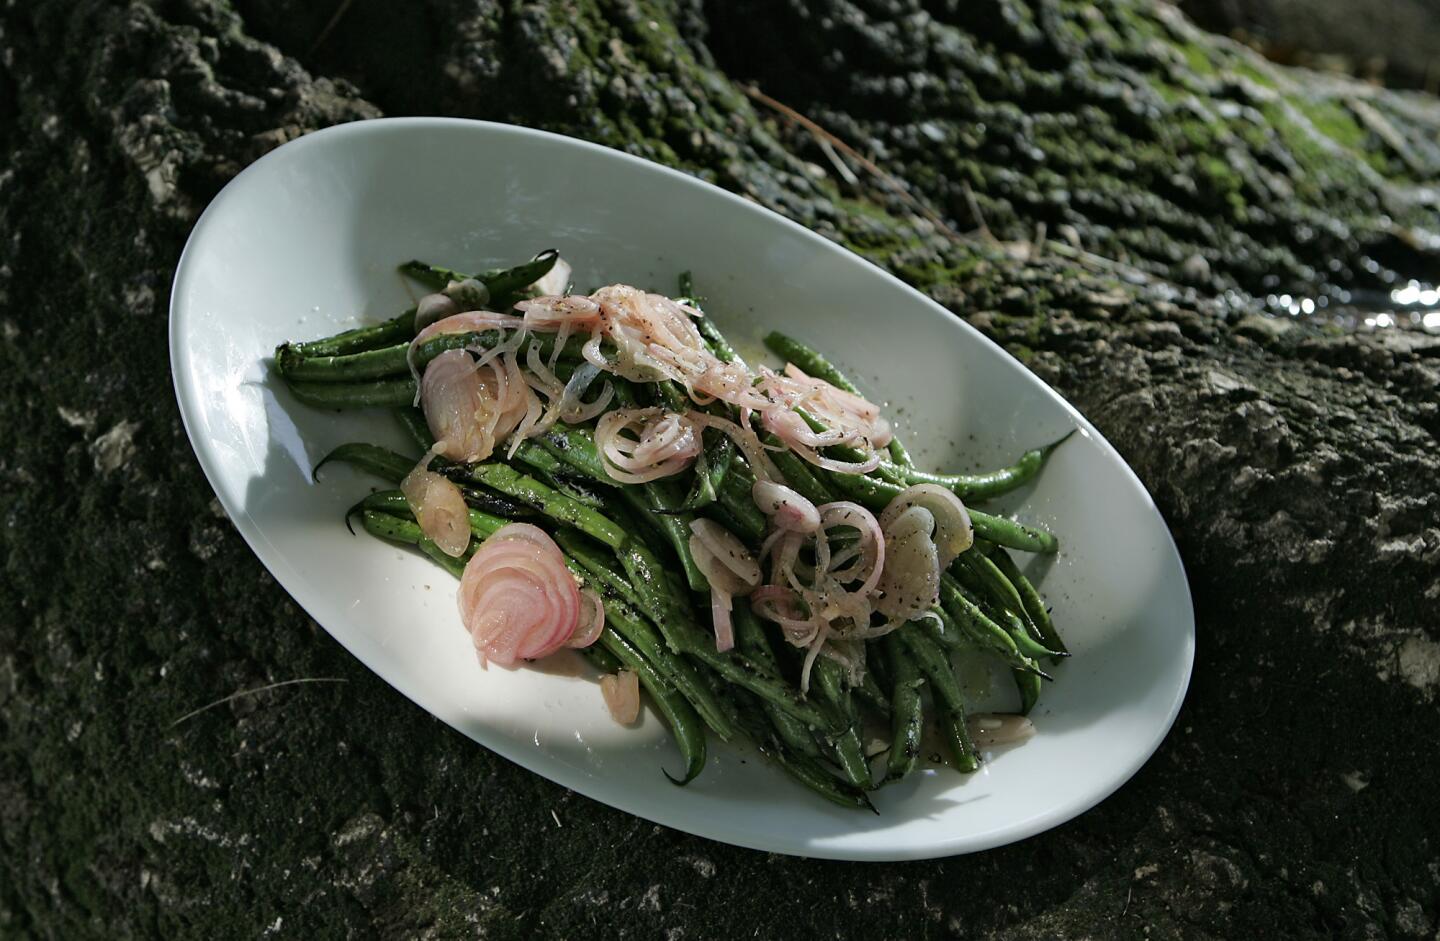 Green beans are quickly softened over the grill, the lightly charred beans dressed with olive oil, salt and tangy quick-pickled shallots.